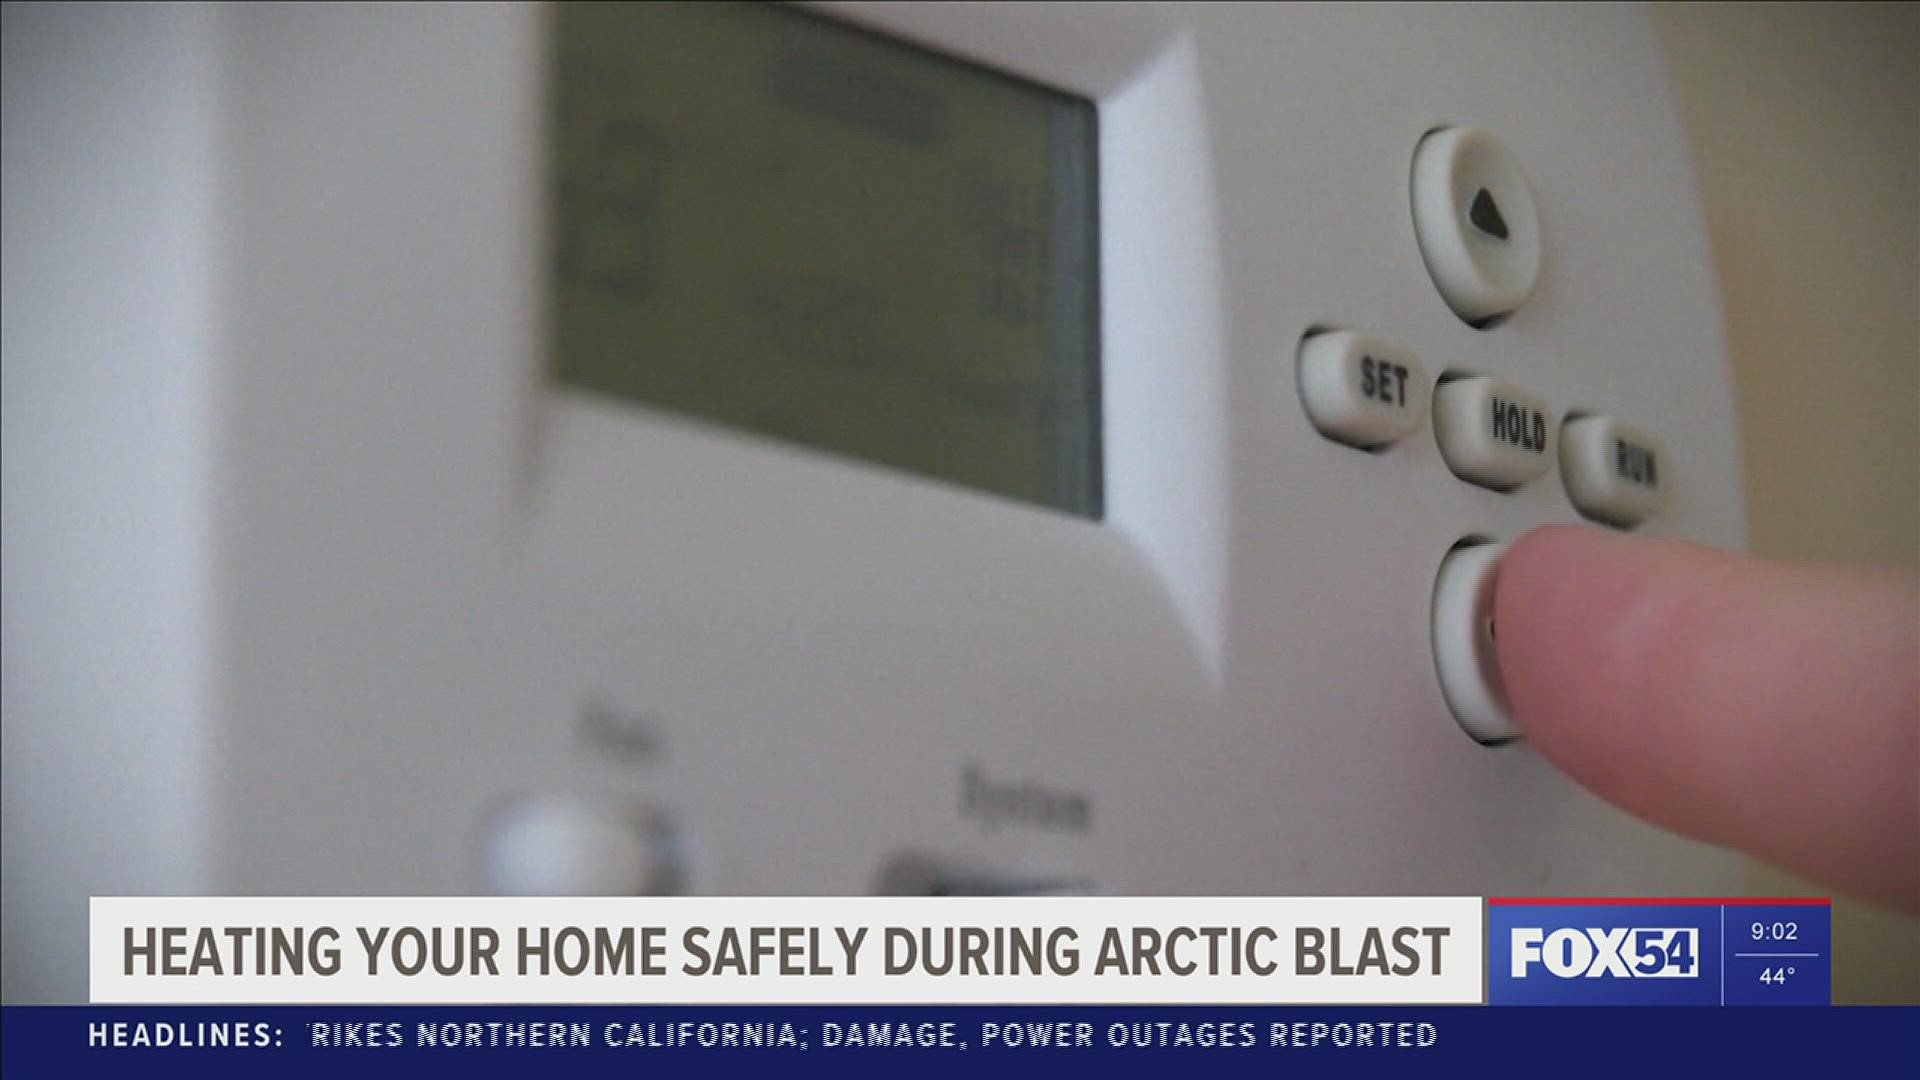 As temperatures continue to drop, we want to make sure you stay warm! FOX54 spoke with an Emergency Management Expert about ways to heat your home safely.